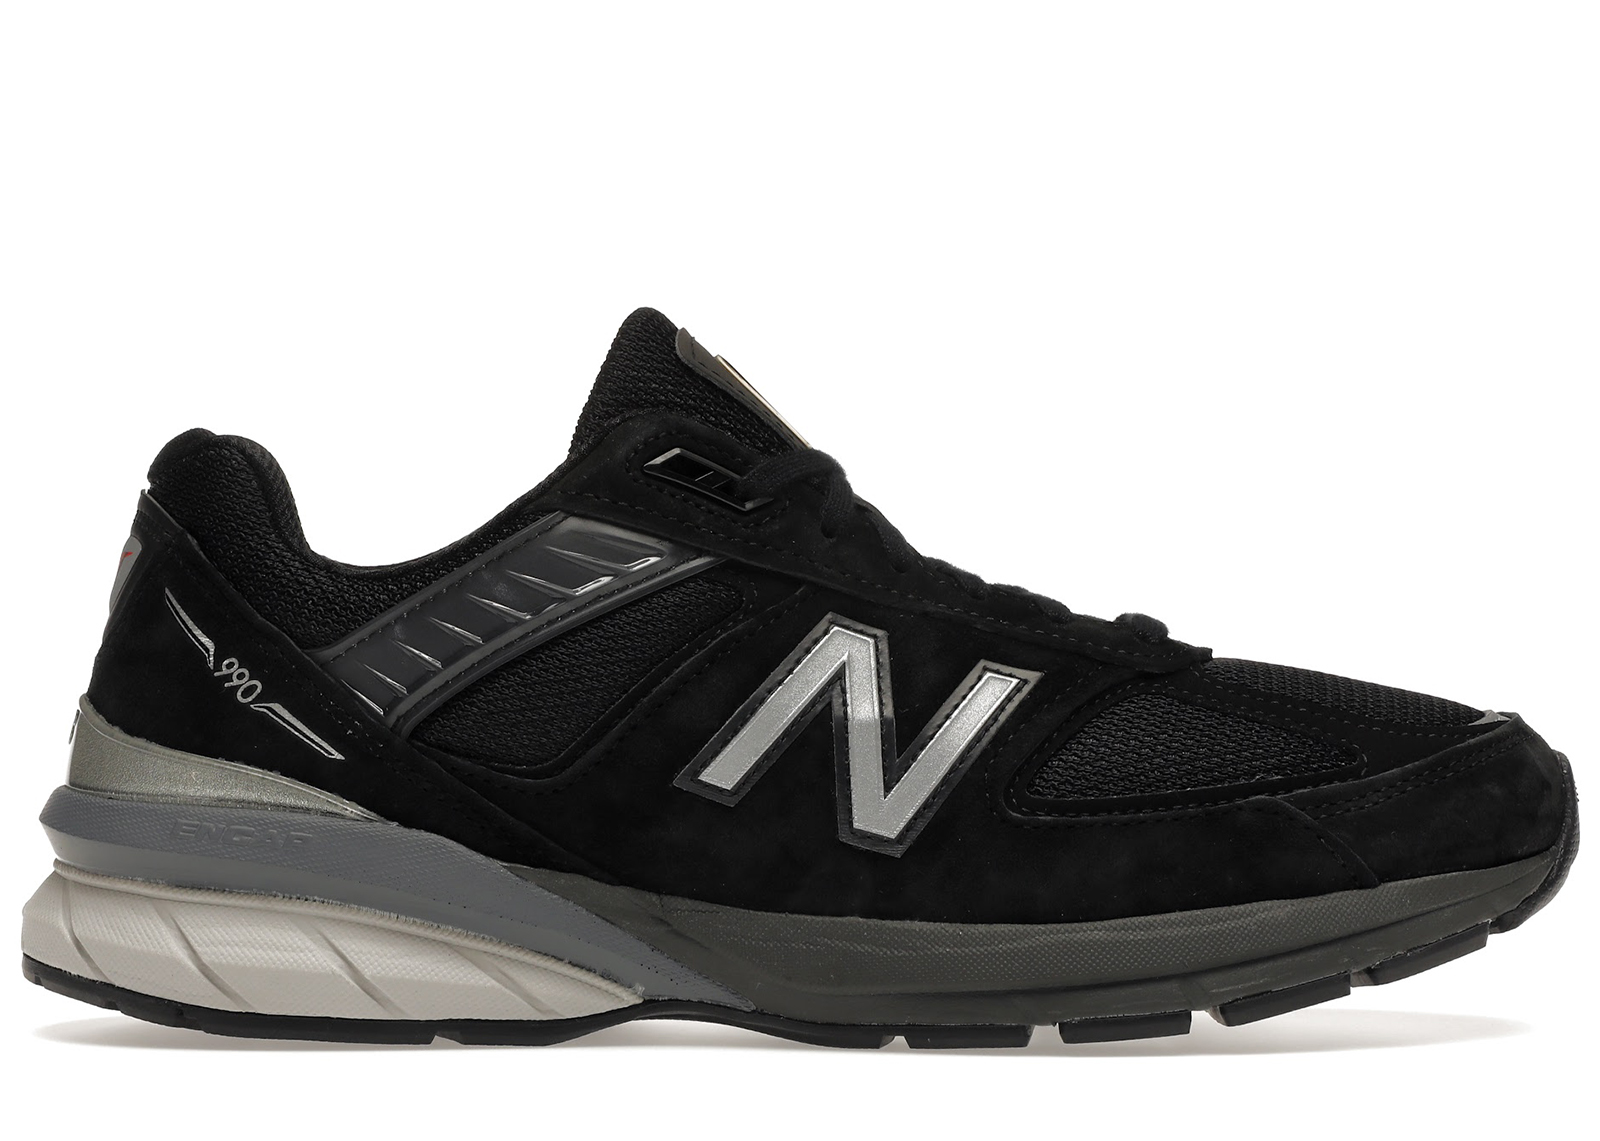 Buy New Balance 990v5 Shoes & New Sneakers - StockX